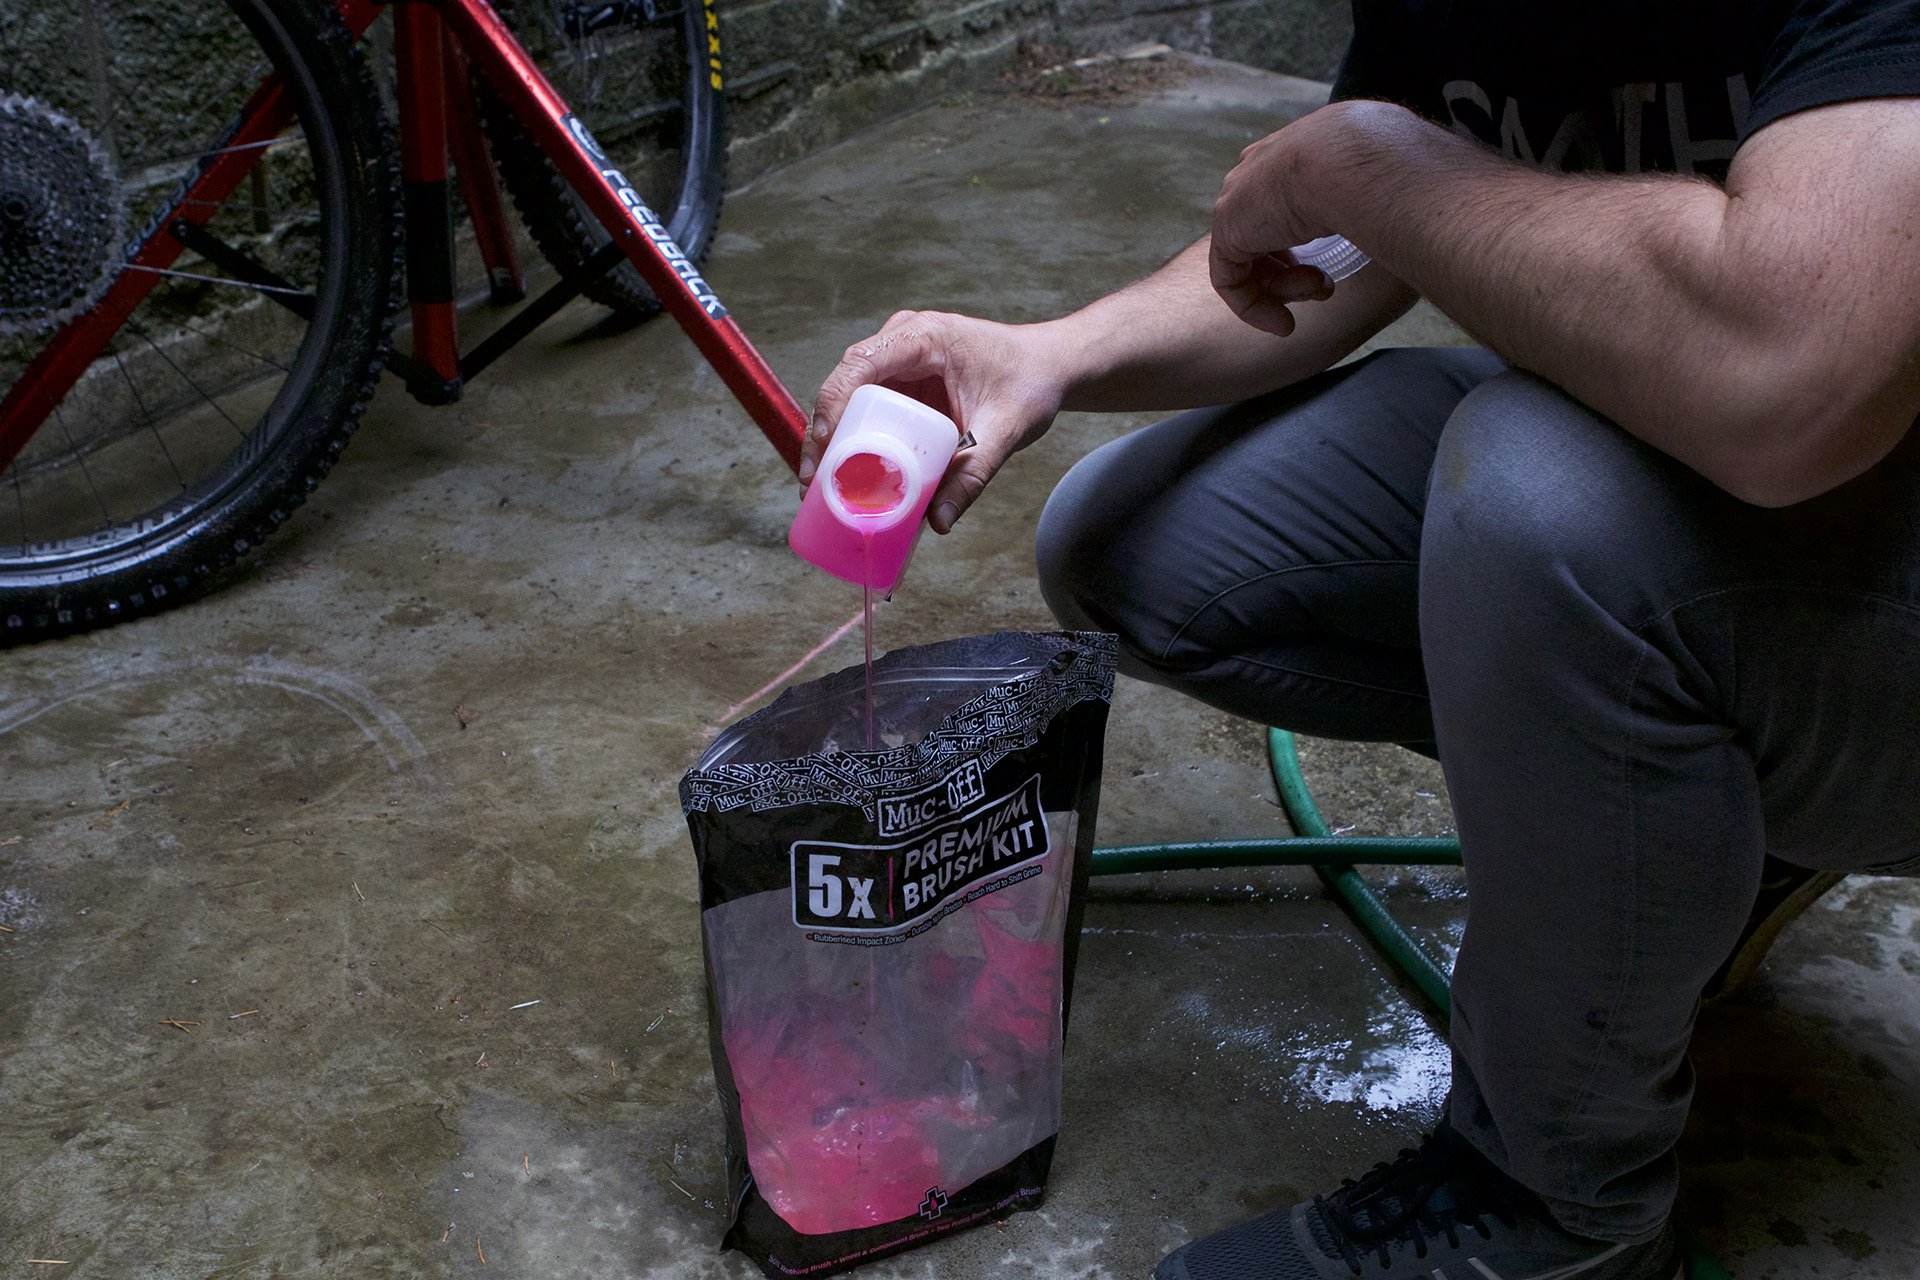 Bike Cleaner Concentrate, Bicycle Cleaning